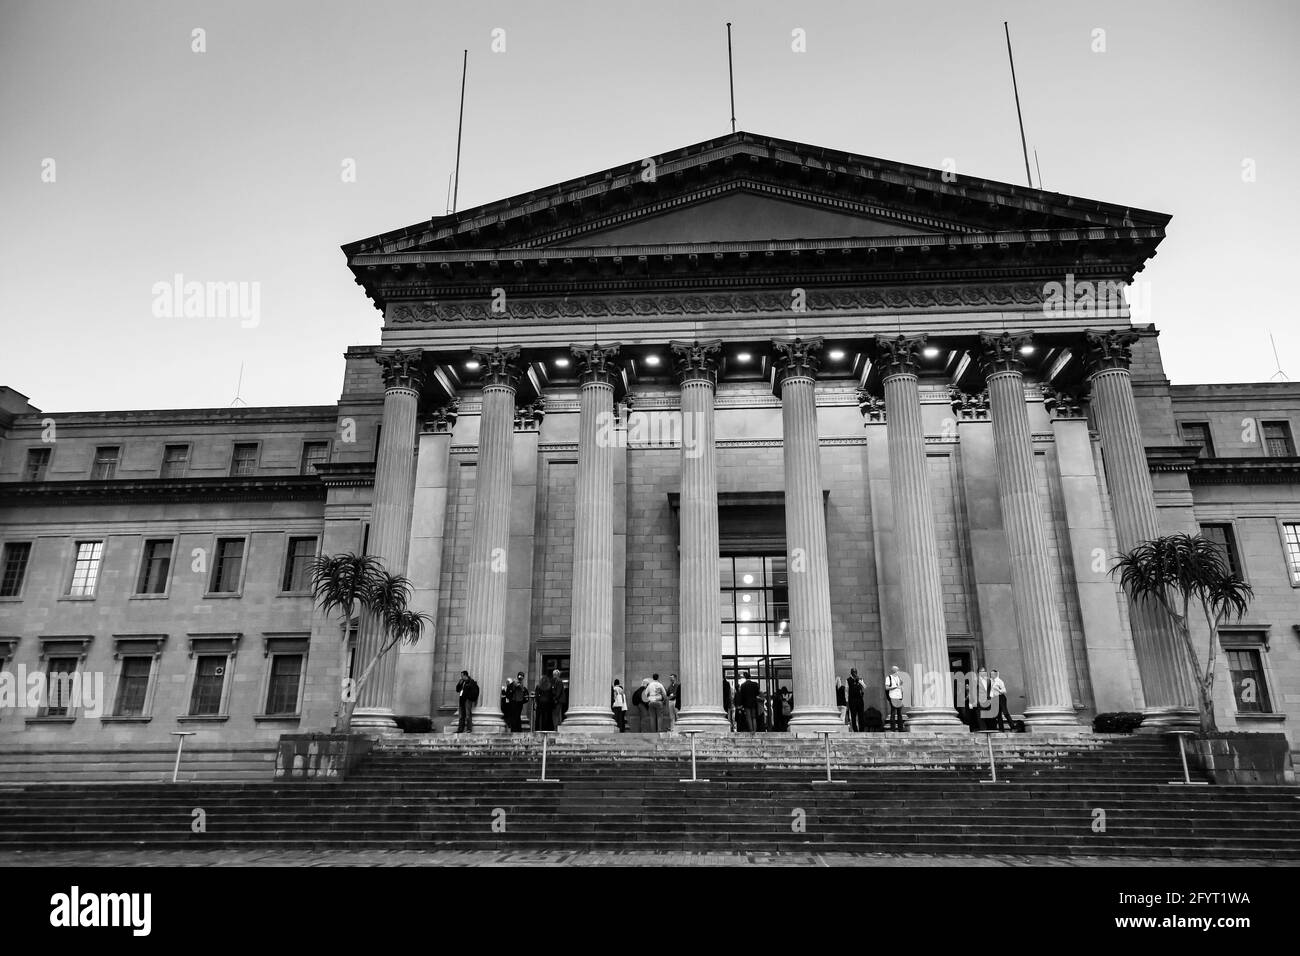 JOHANNESBURG, SOUTH AFRICA - Jan 05, 2021: Johannesburg, South Africa - November 24, 2014: Exterior view of the Great Hall at the University of the Wi Stock Photo